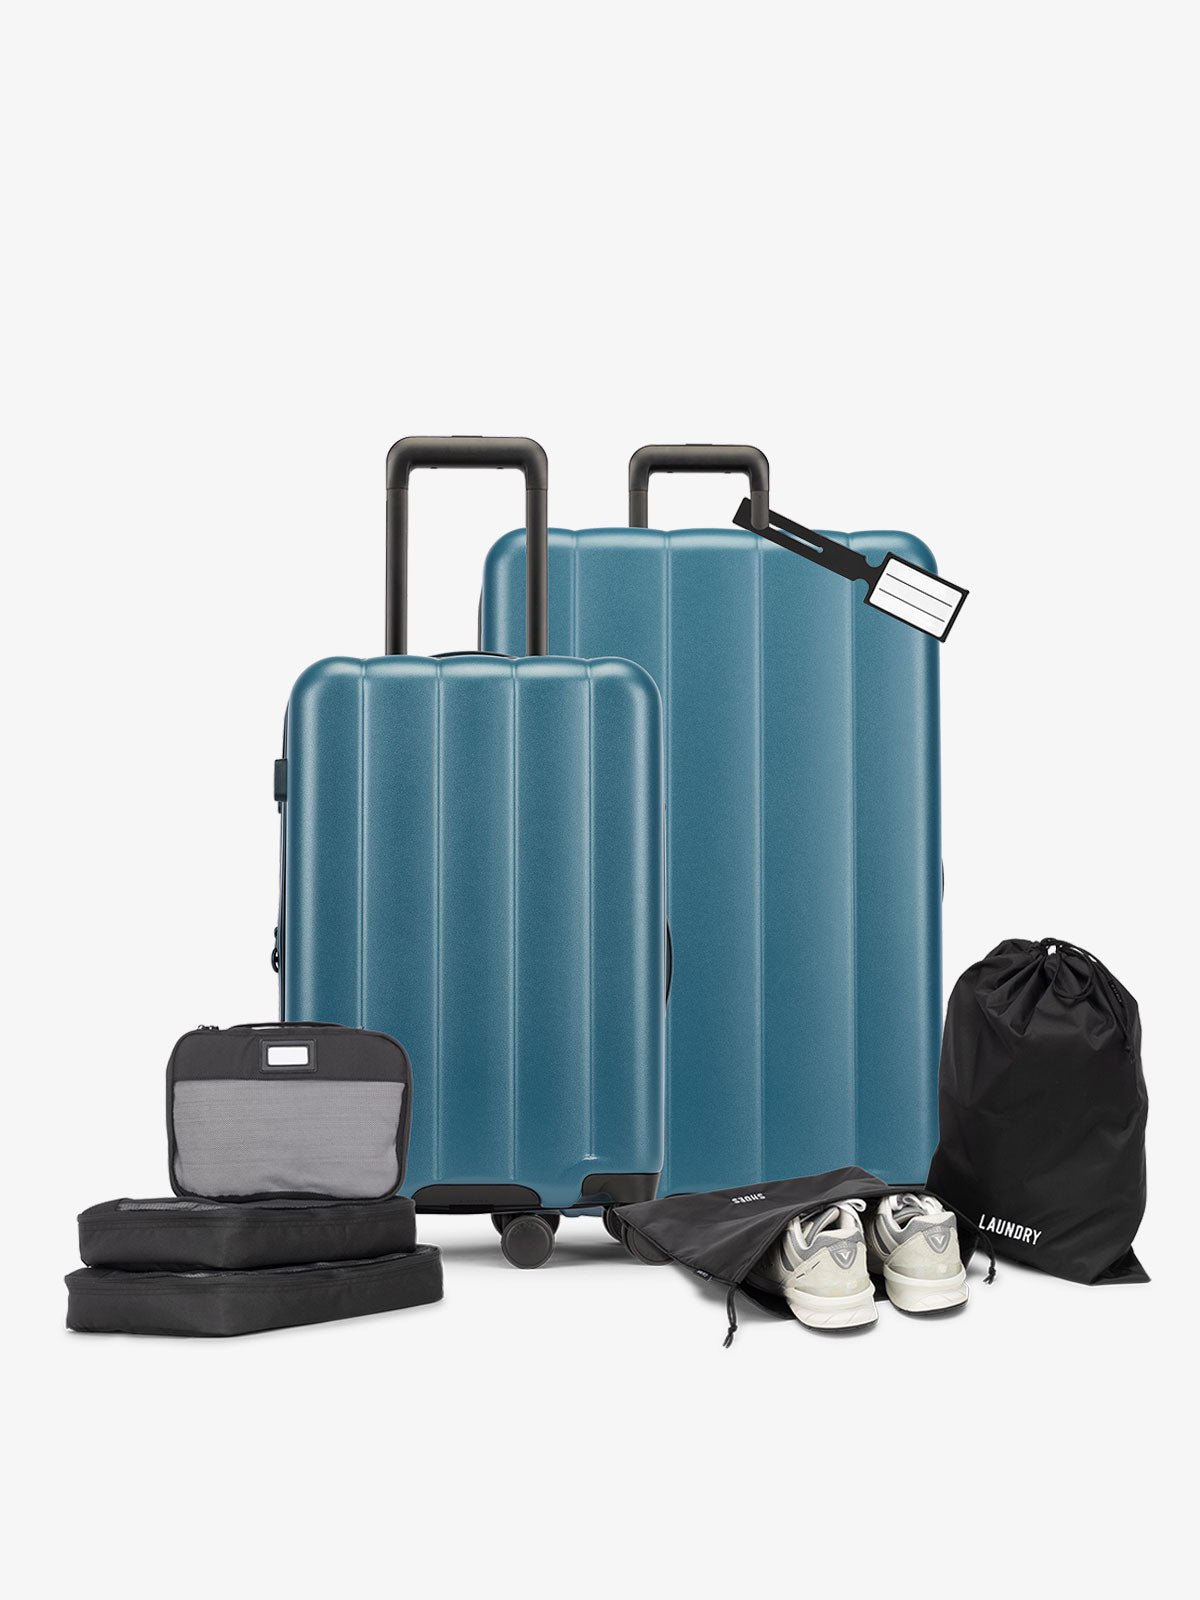 CALPAK starter bundle with carry-on, large luggage, packing cubes, pouches, and luggage tag